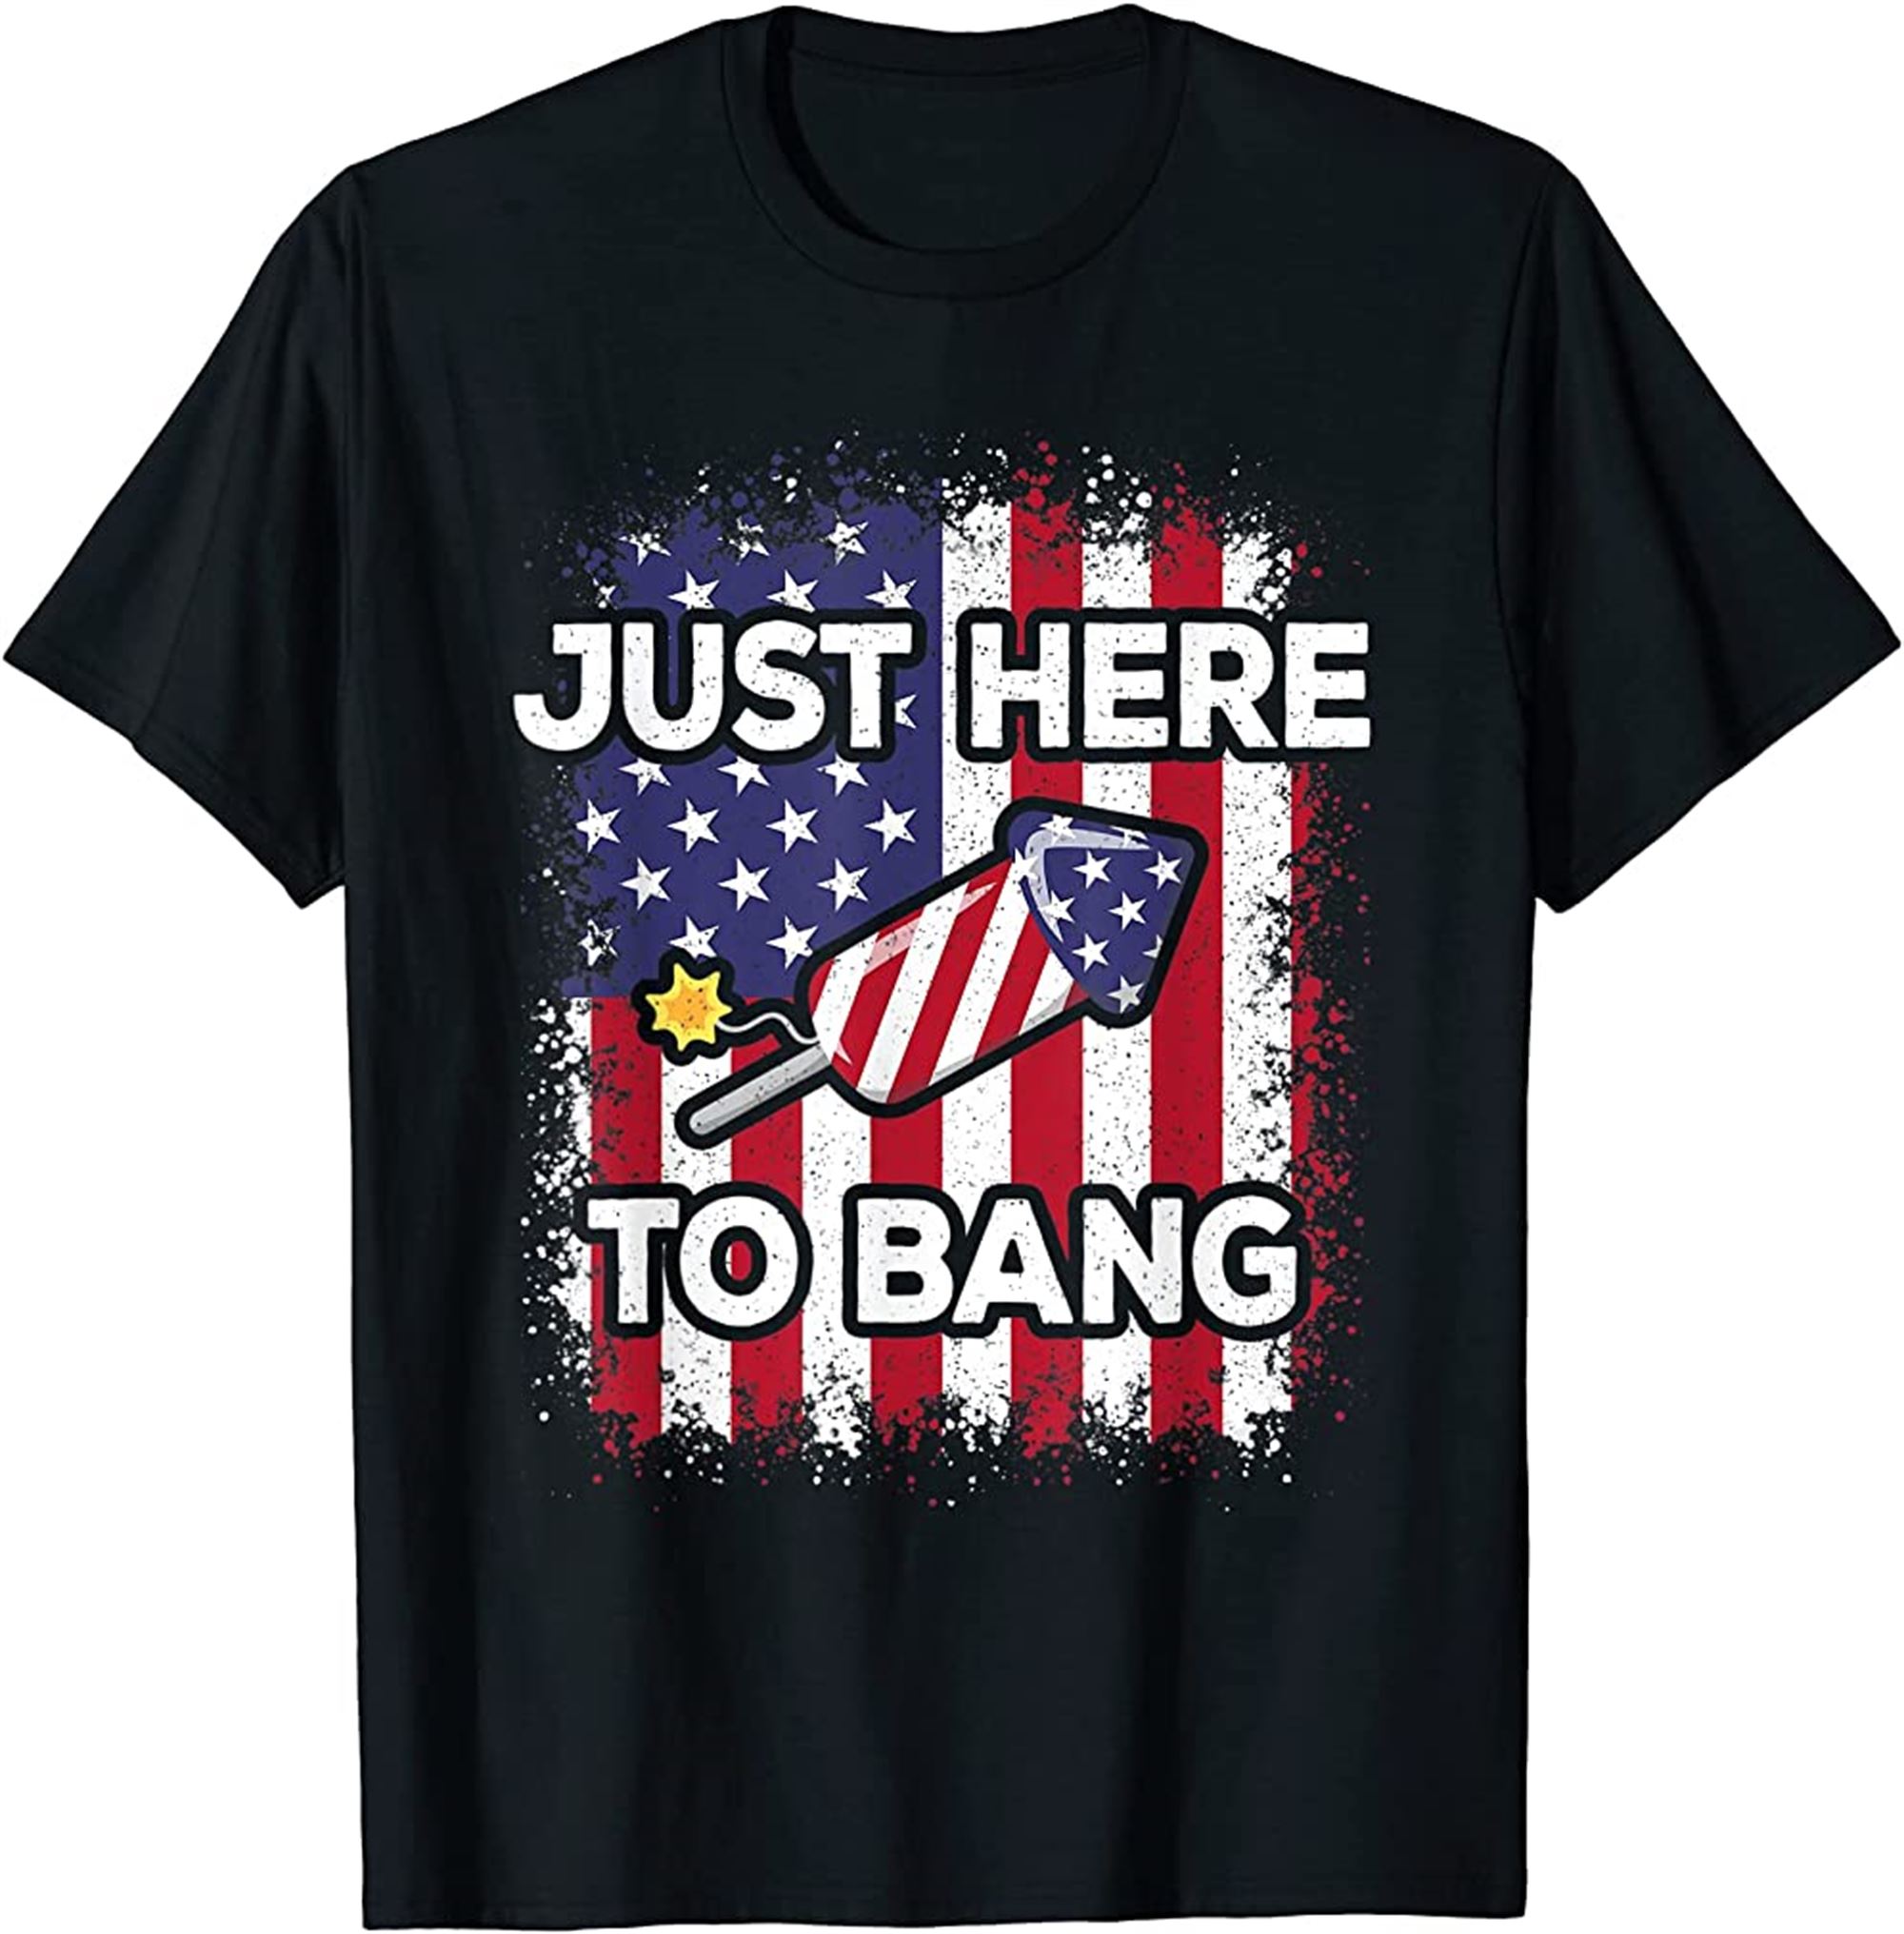 Just Here To Bang 4th Of July American Flag Fourth Of July T-shirt Full Size Up To 5xl